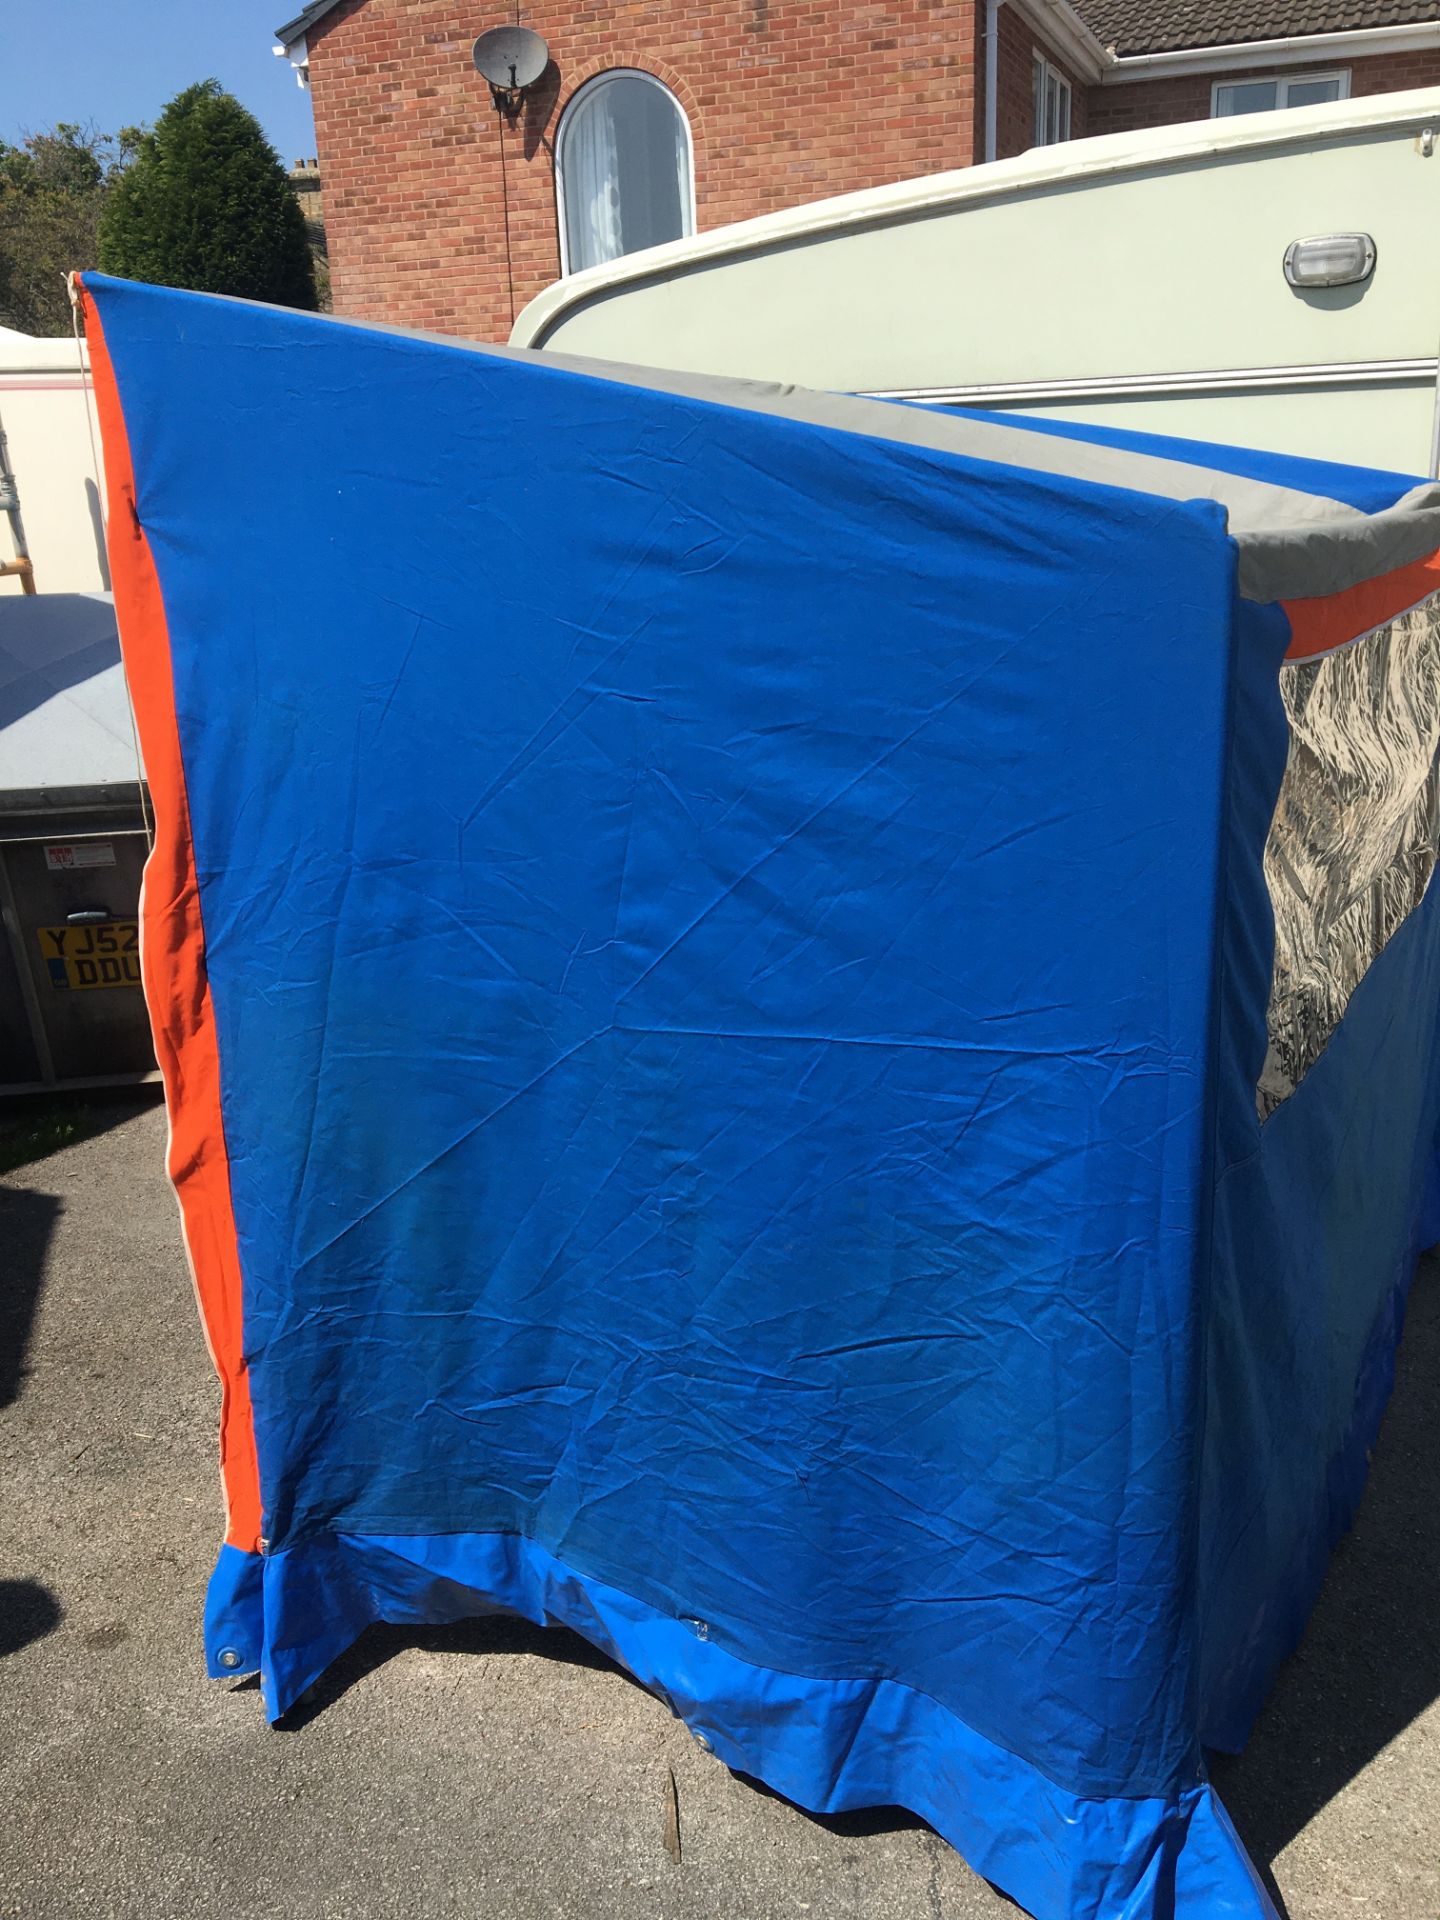 Awning/sun canopy, blue canvas with red trim, approximately 2.2m wide and 1. - Image 2 of 3